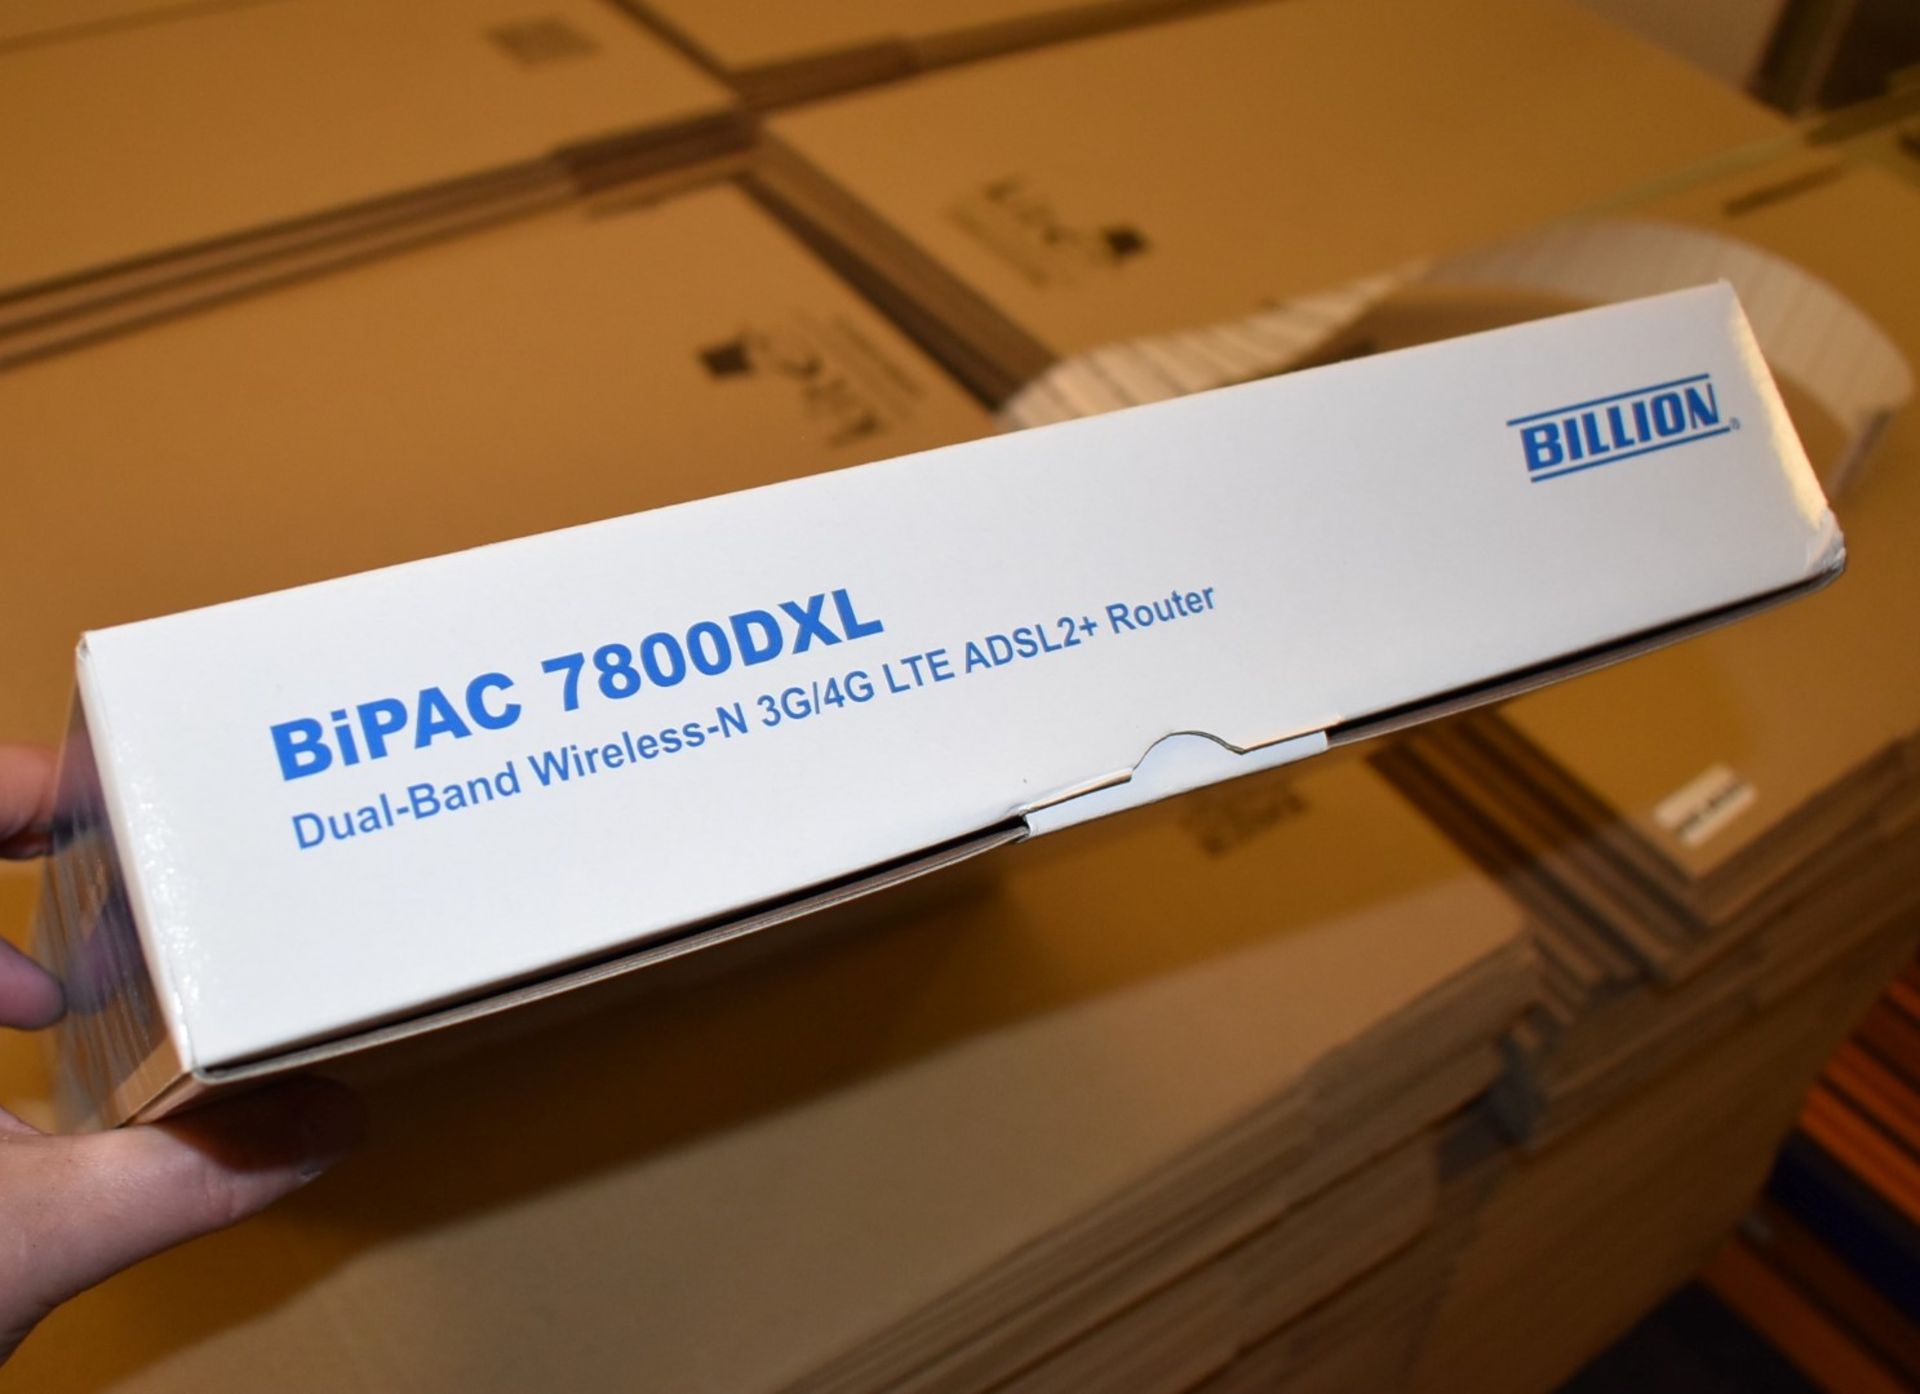 1 x Billion BiPAC 7800DXL Dual Band Wireless-N 3G/4G LTE ADSL2+ Router - New Boxed Stock - Image 4 of 4